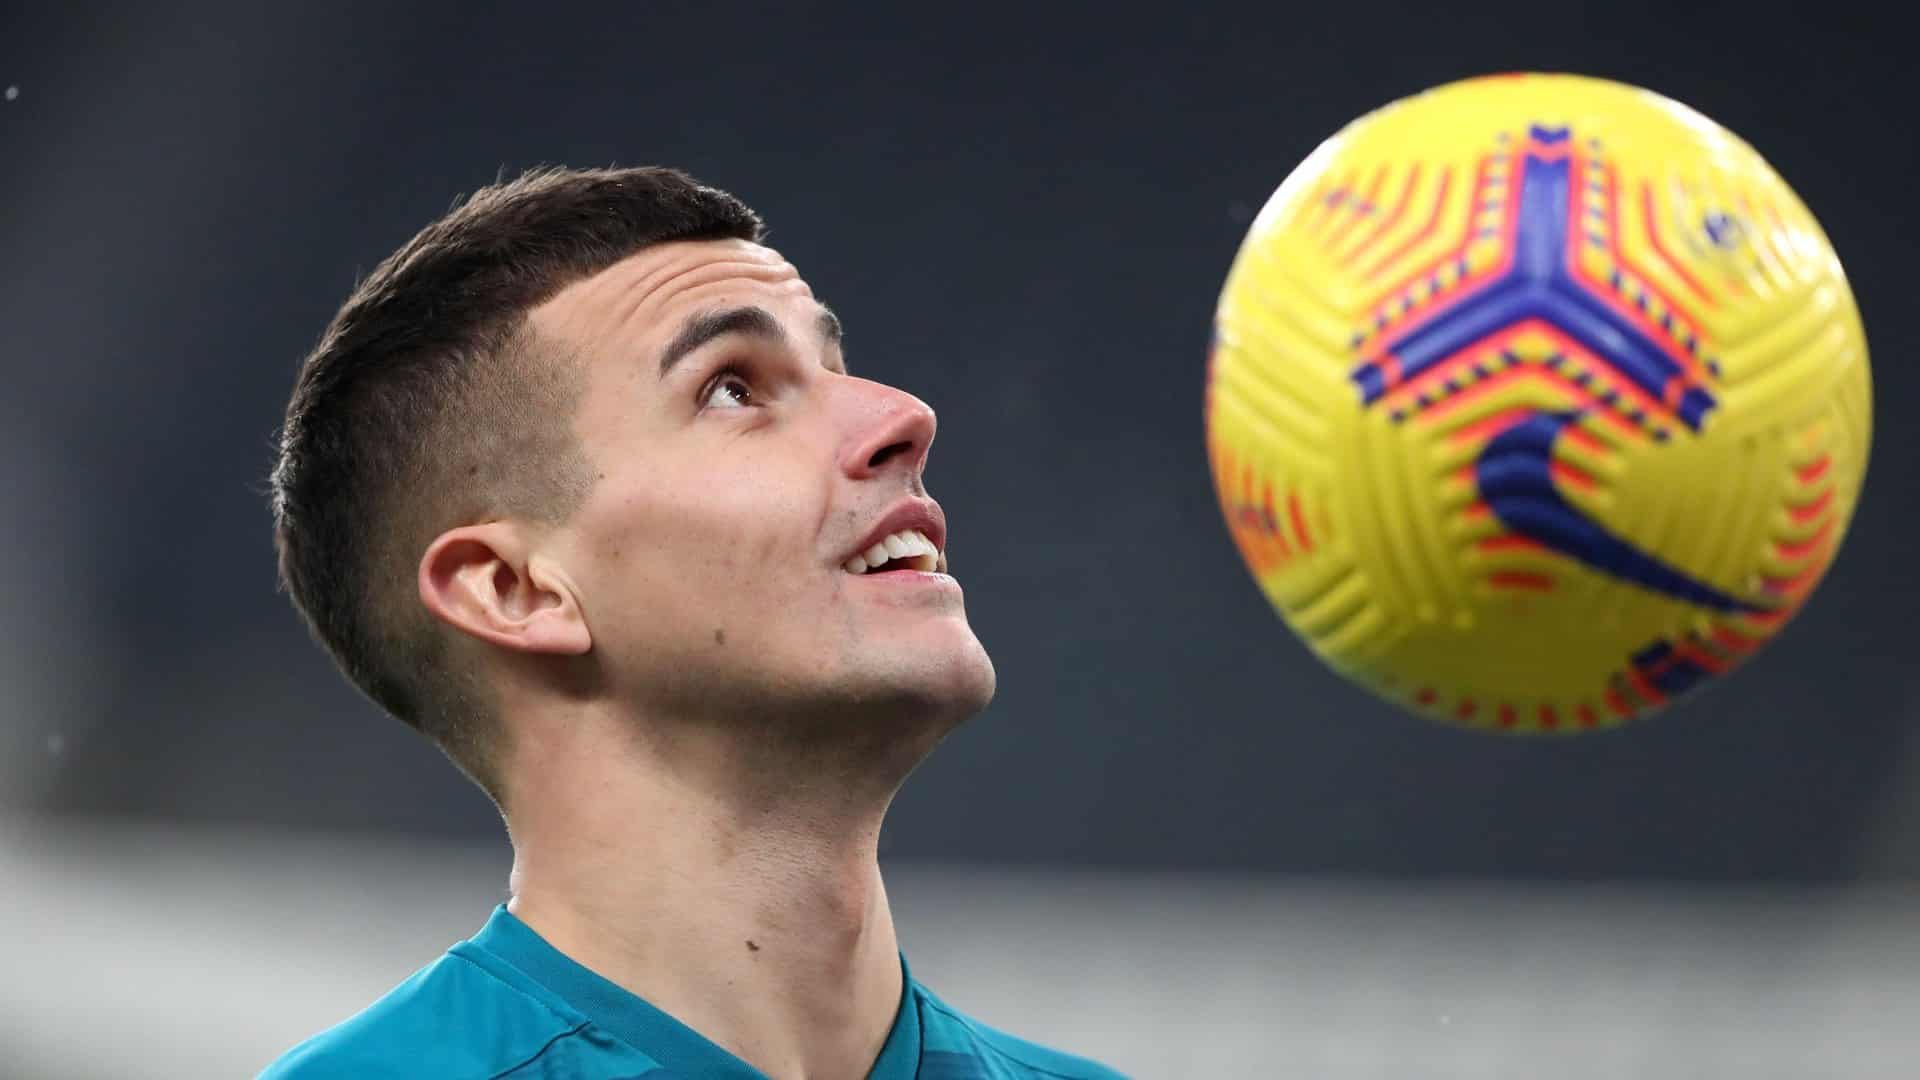 Karl Darlow's head in profile, with a size five football next to it floating in the air